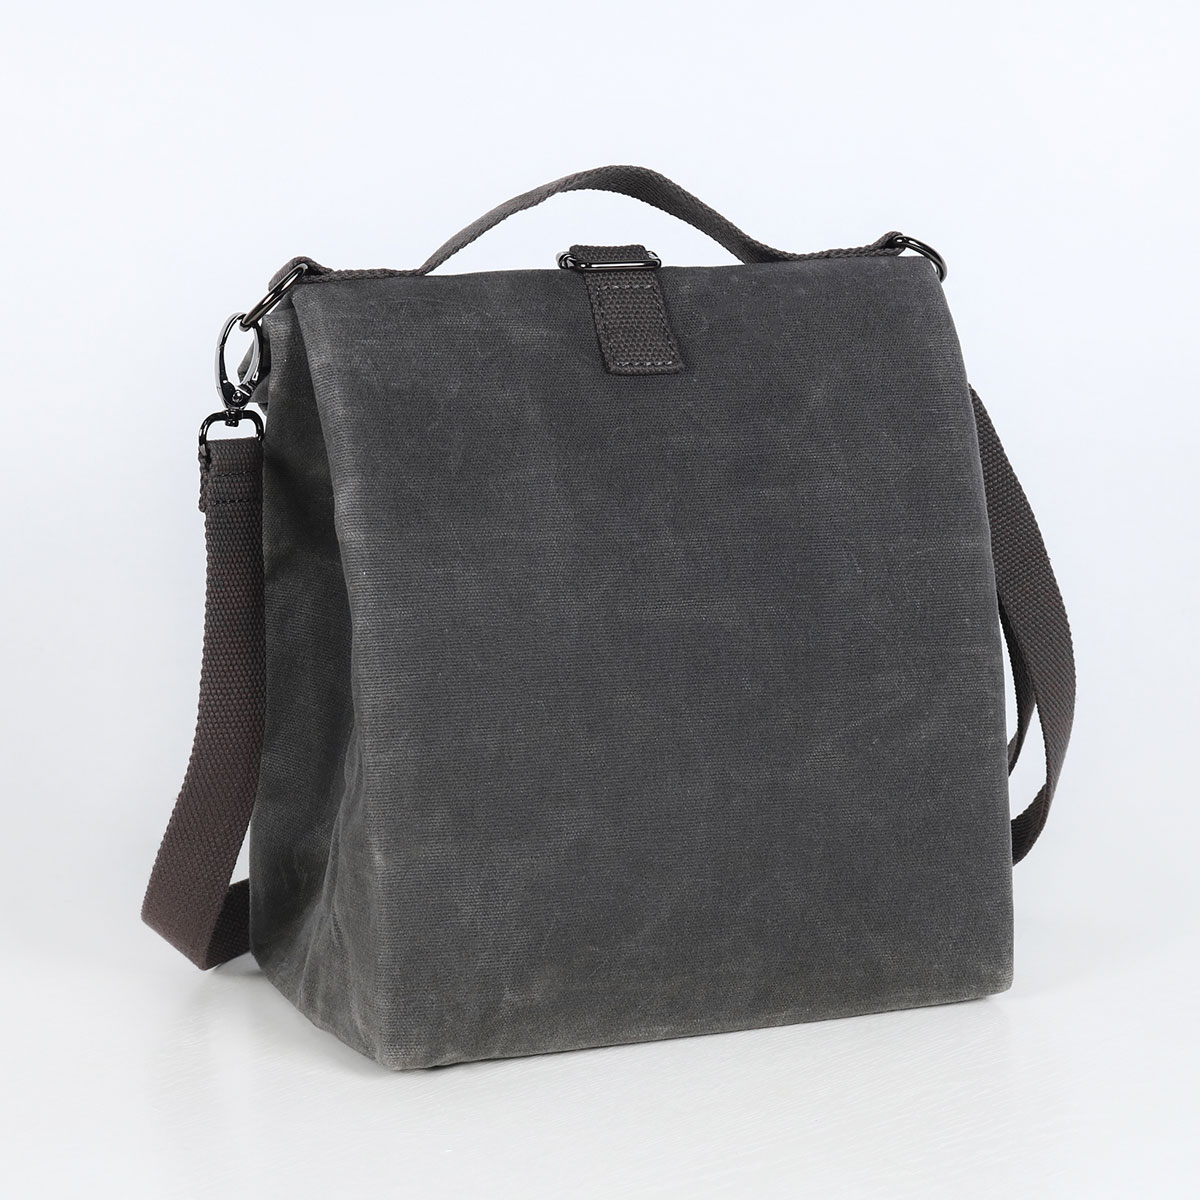 Waxed Canvas Lunch Bag for Men, Modern Lunch Bag for Work, Fashionable  Waxed Canvas Lunch Bags 